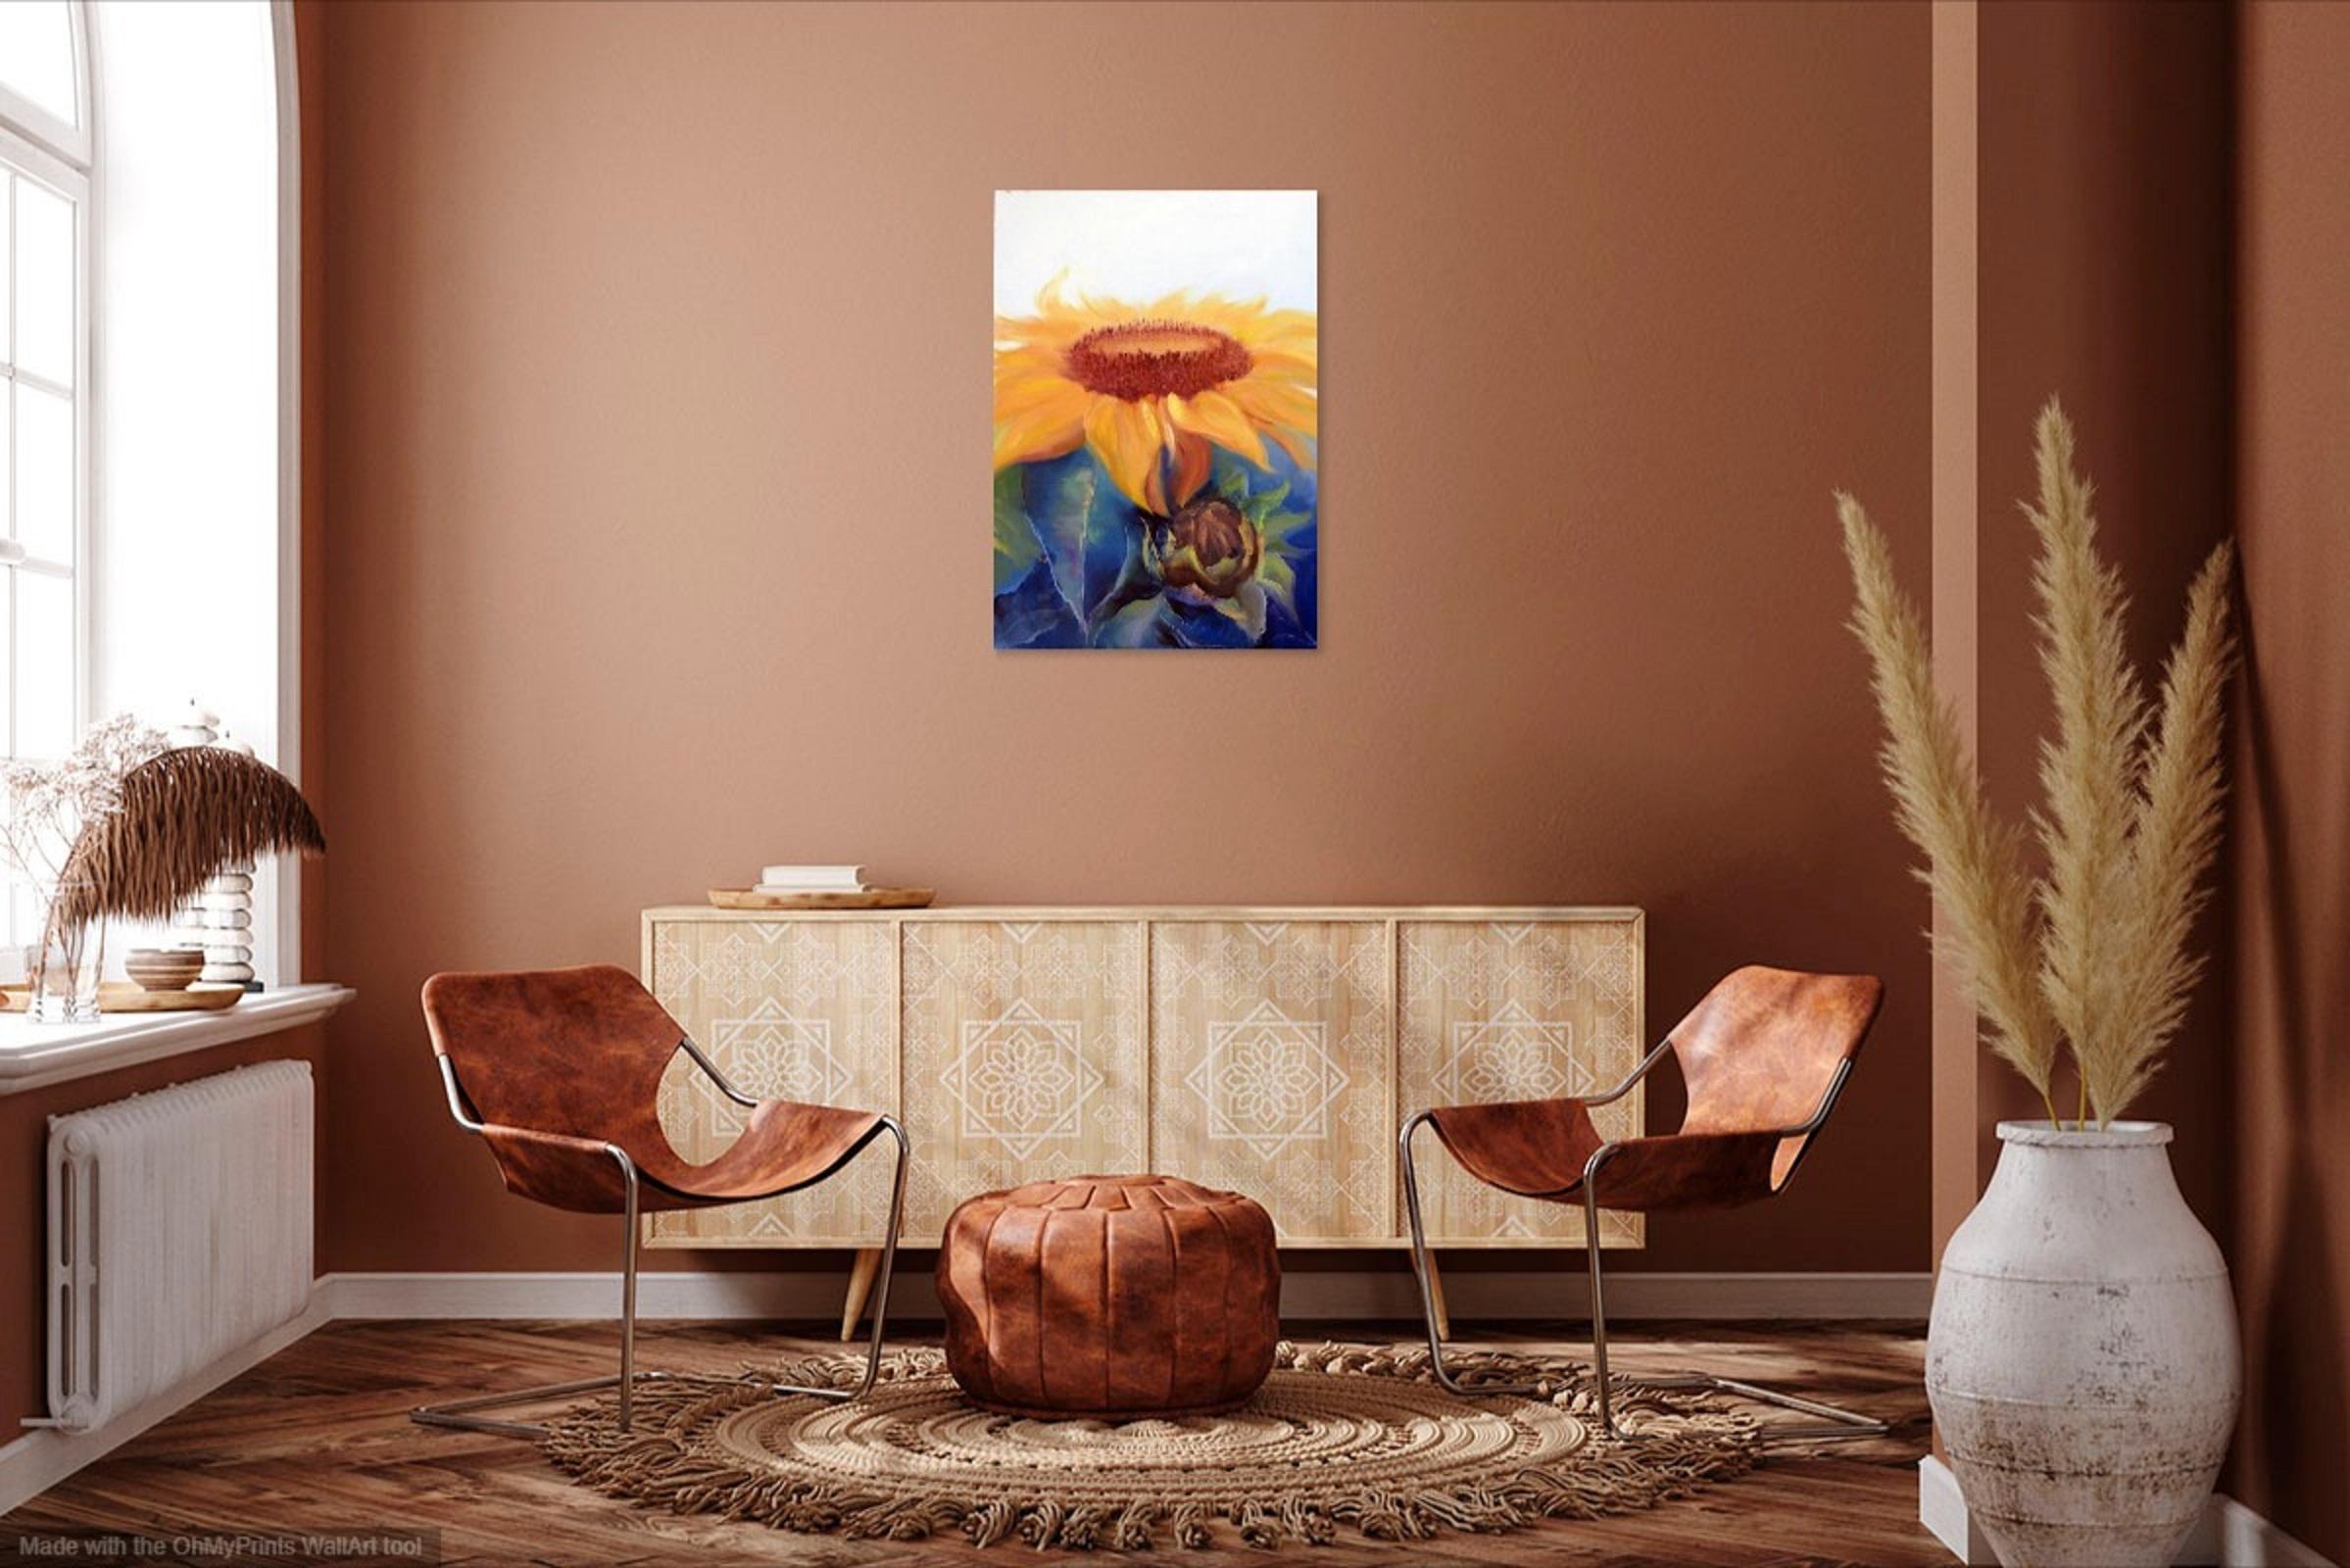 In this oil on canvas, I've poured my soul into capturing the vibrant essence of life. With bold strokes and vivid hues, I've embraced expressionism and realism to evoke a sense of warmth and growth. The sunflower stands tall, embodying resilience